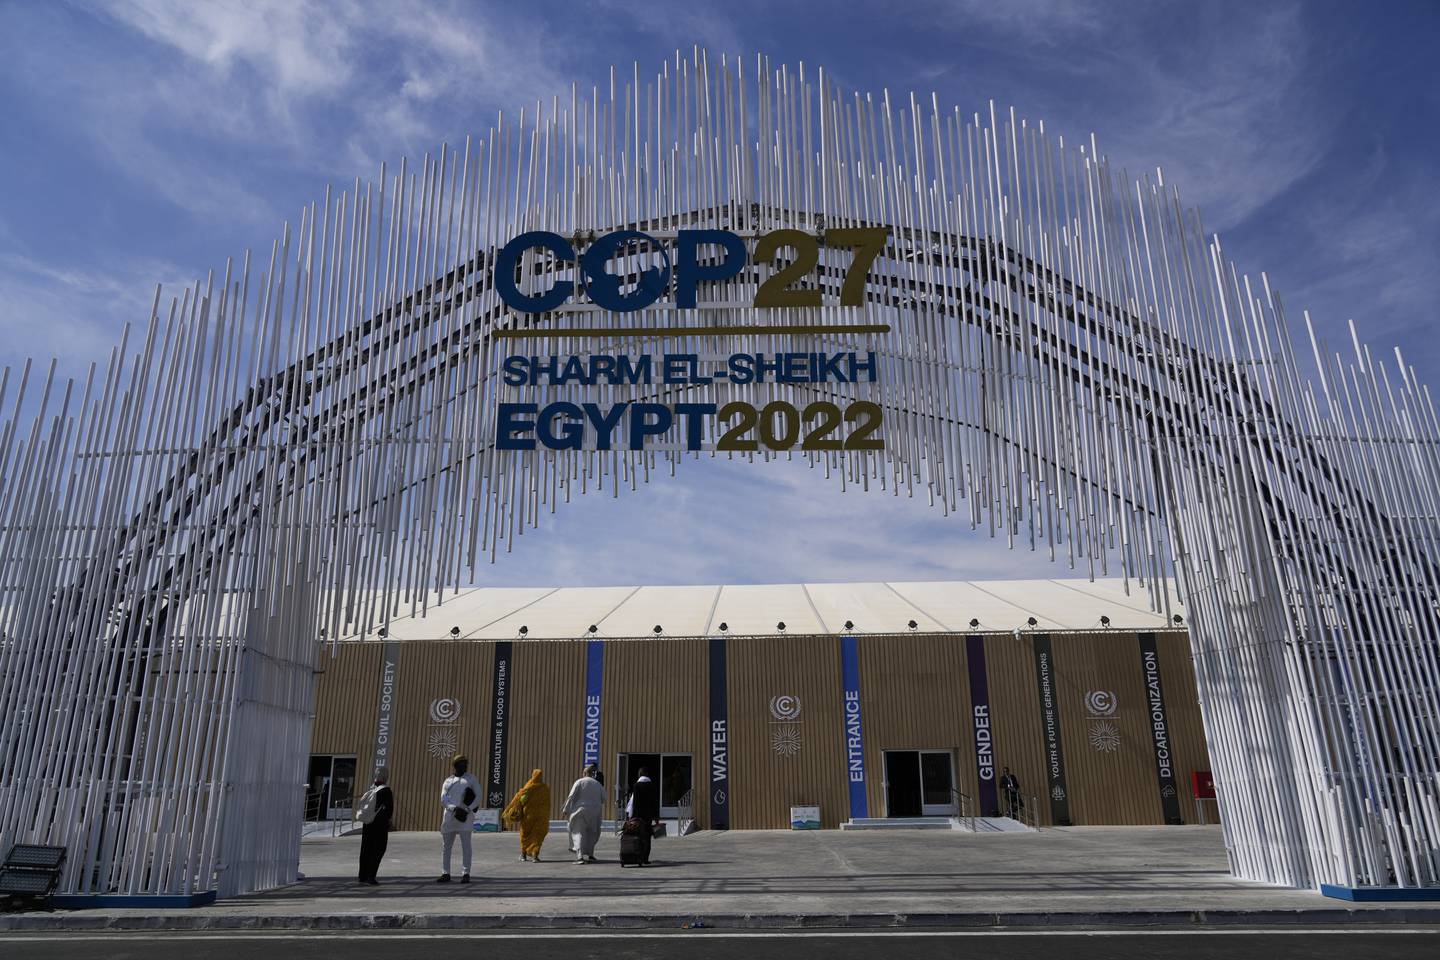 Preparations are under way for Cop27 in Sharm El Sheikh, Egypt this month. AP